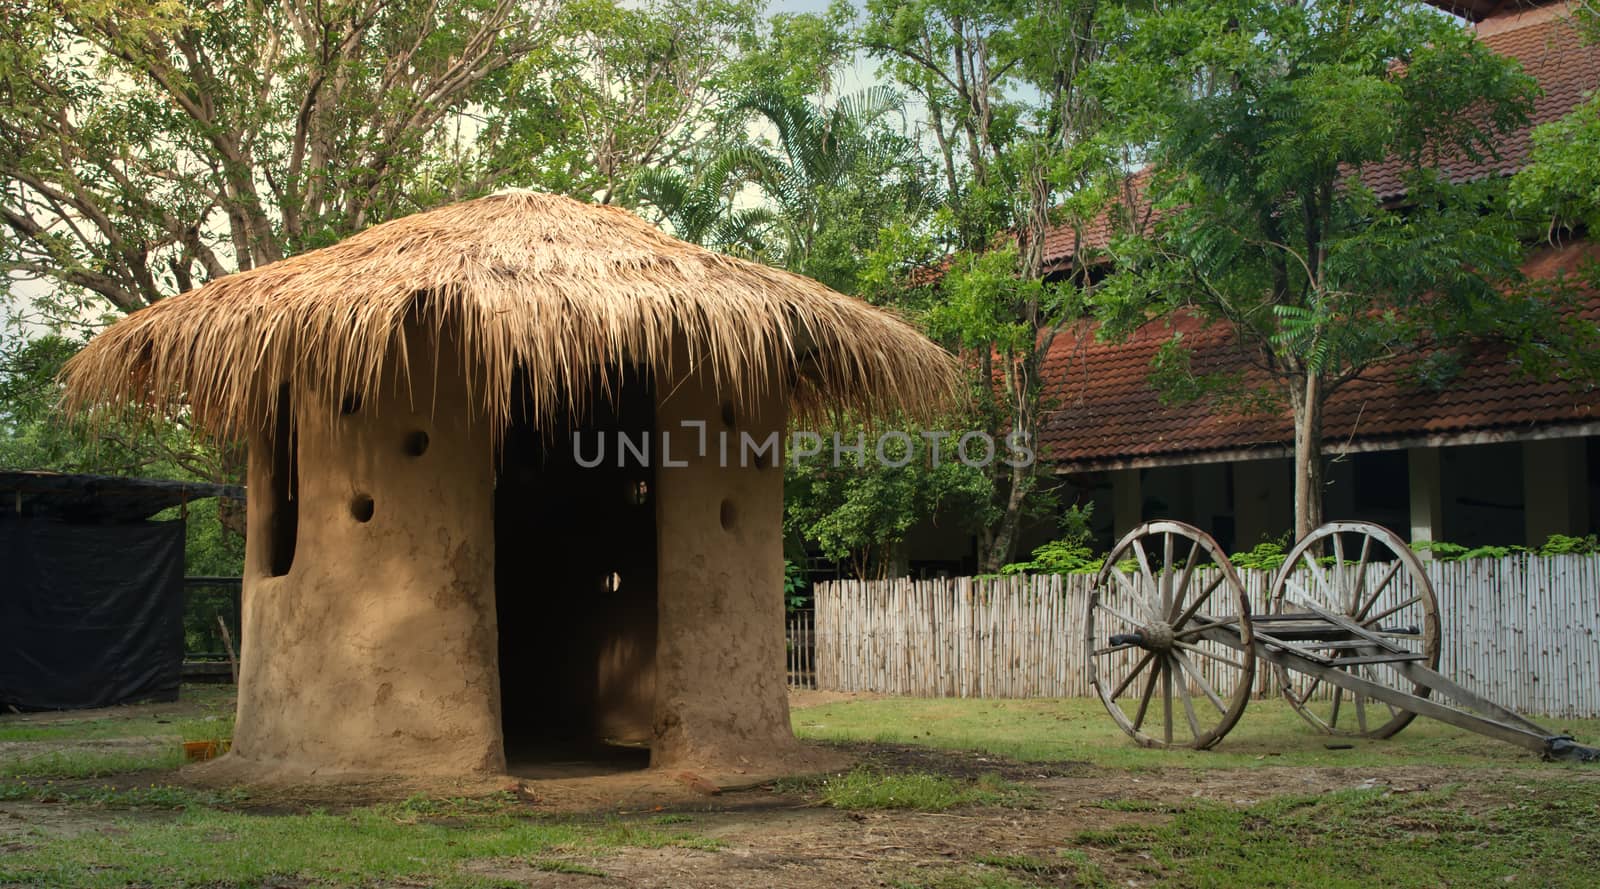 A small thatched-roof mud house common in Thailand.